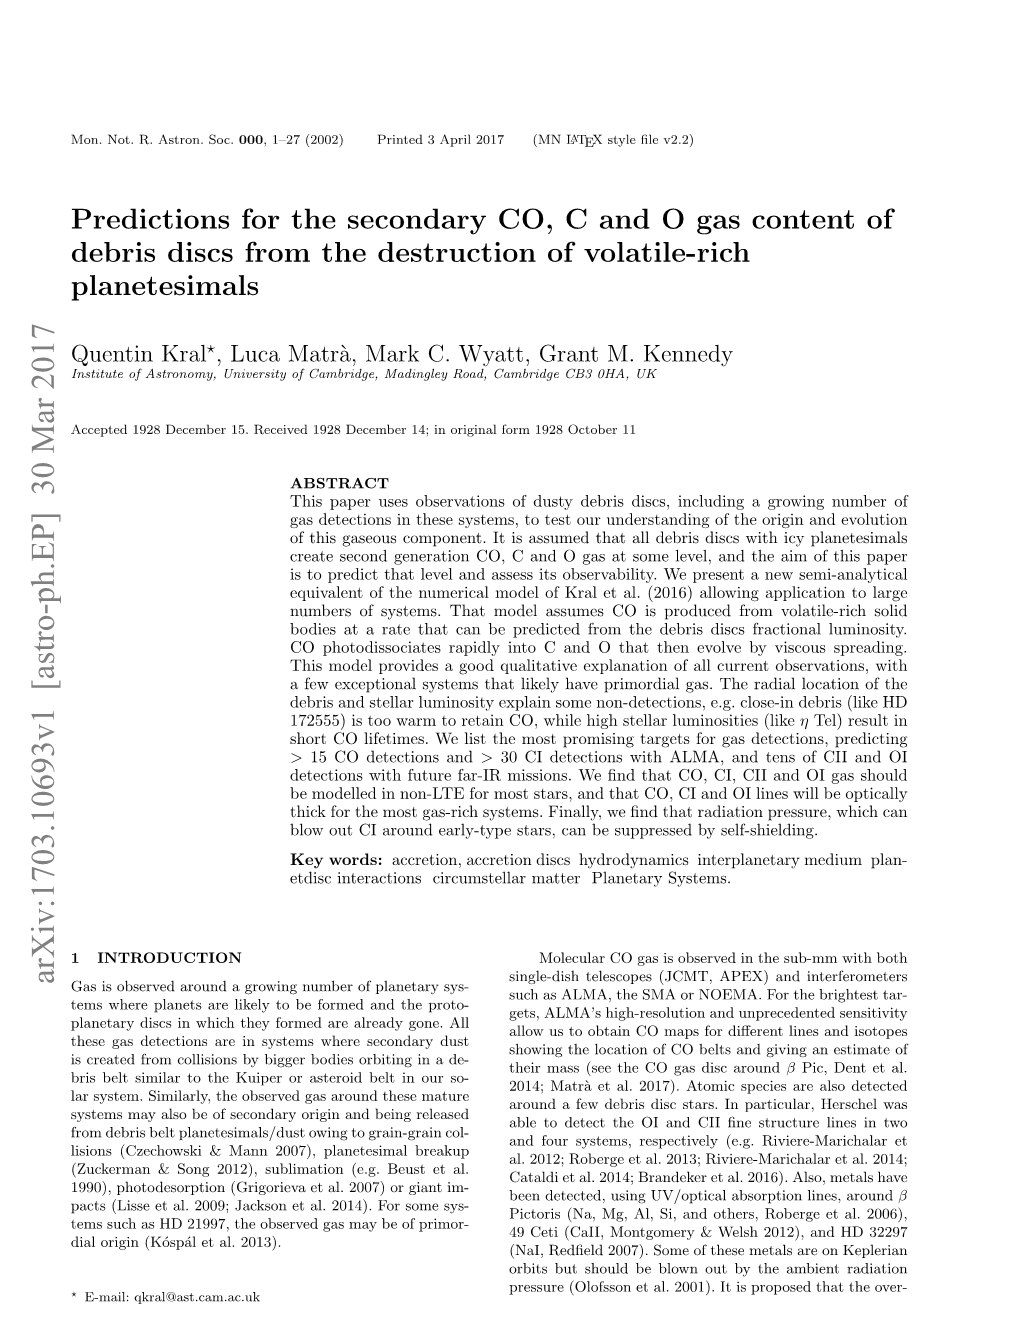 Predictions for the Secondary CO, C and O Gas Content of Debris Discs from the Destruction of Volatile-Rich Planetesimals